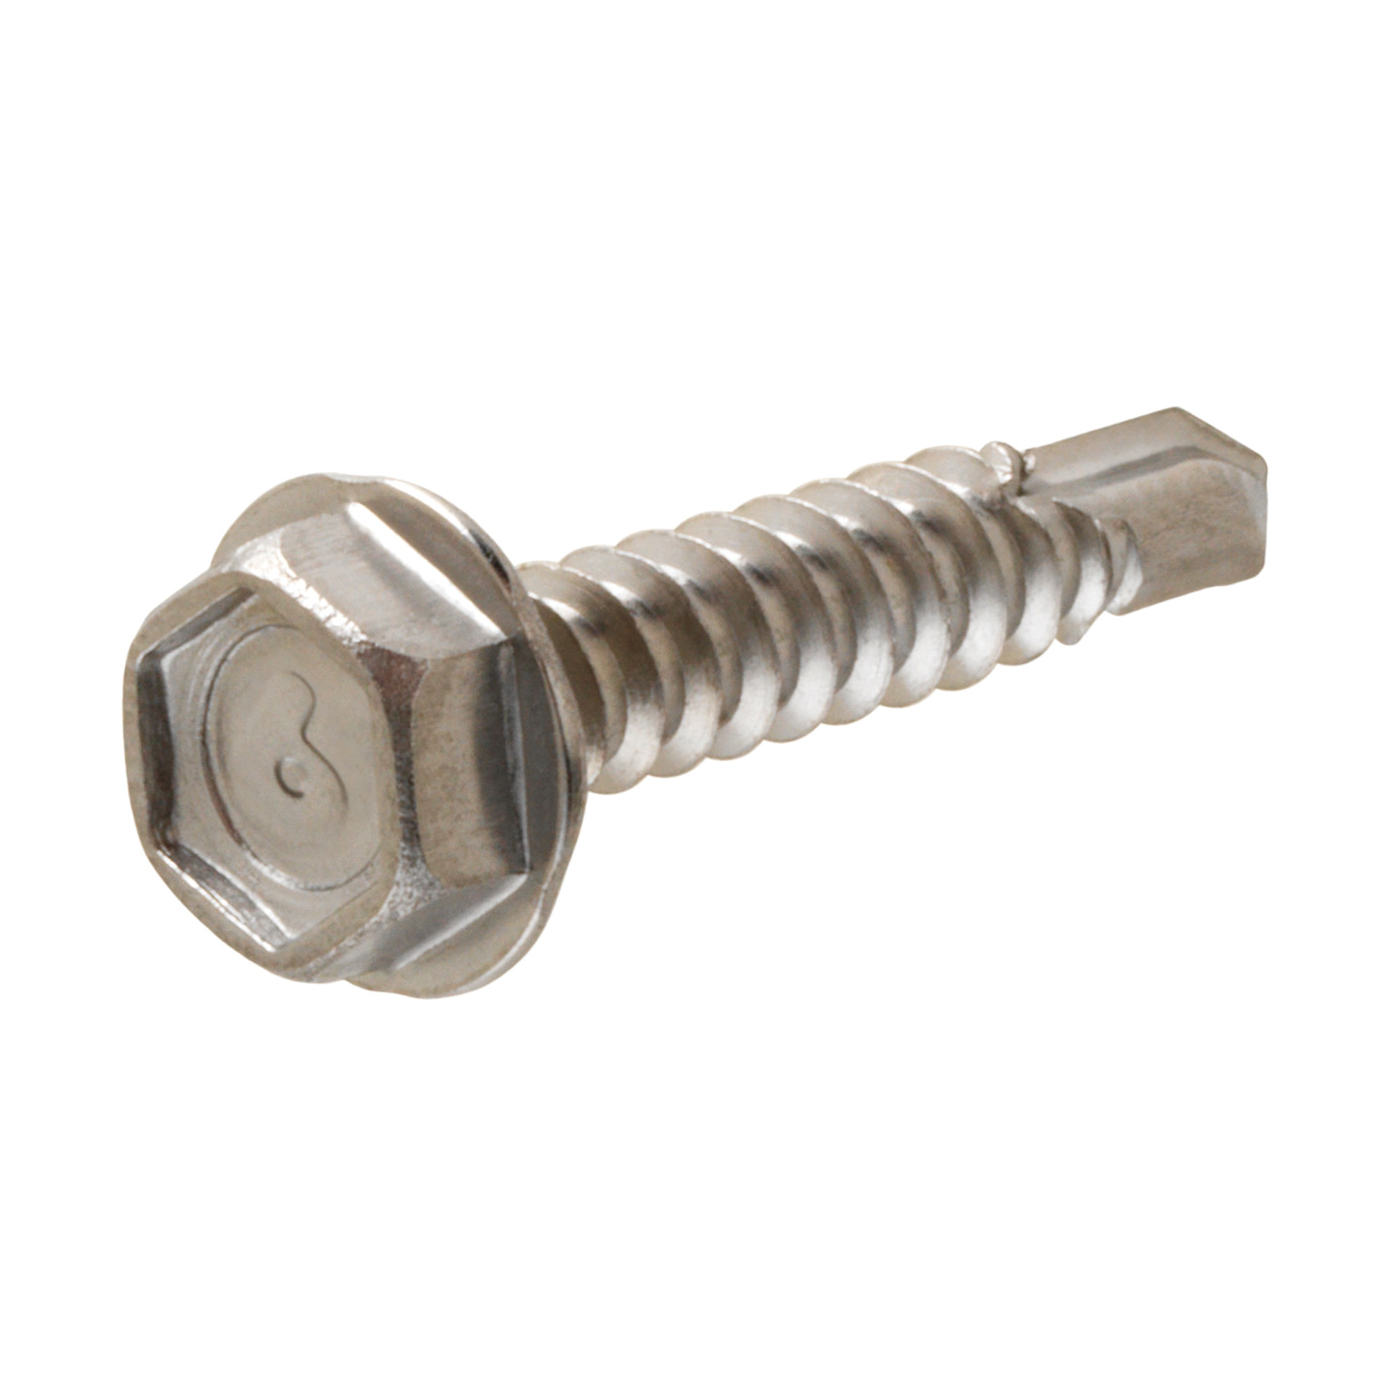 881845 Screw, #14 Thread, 1 in L, Coarse Thread, Washer Head, Hex Drive, Self-Drilling Point, Stainless Steel